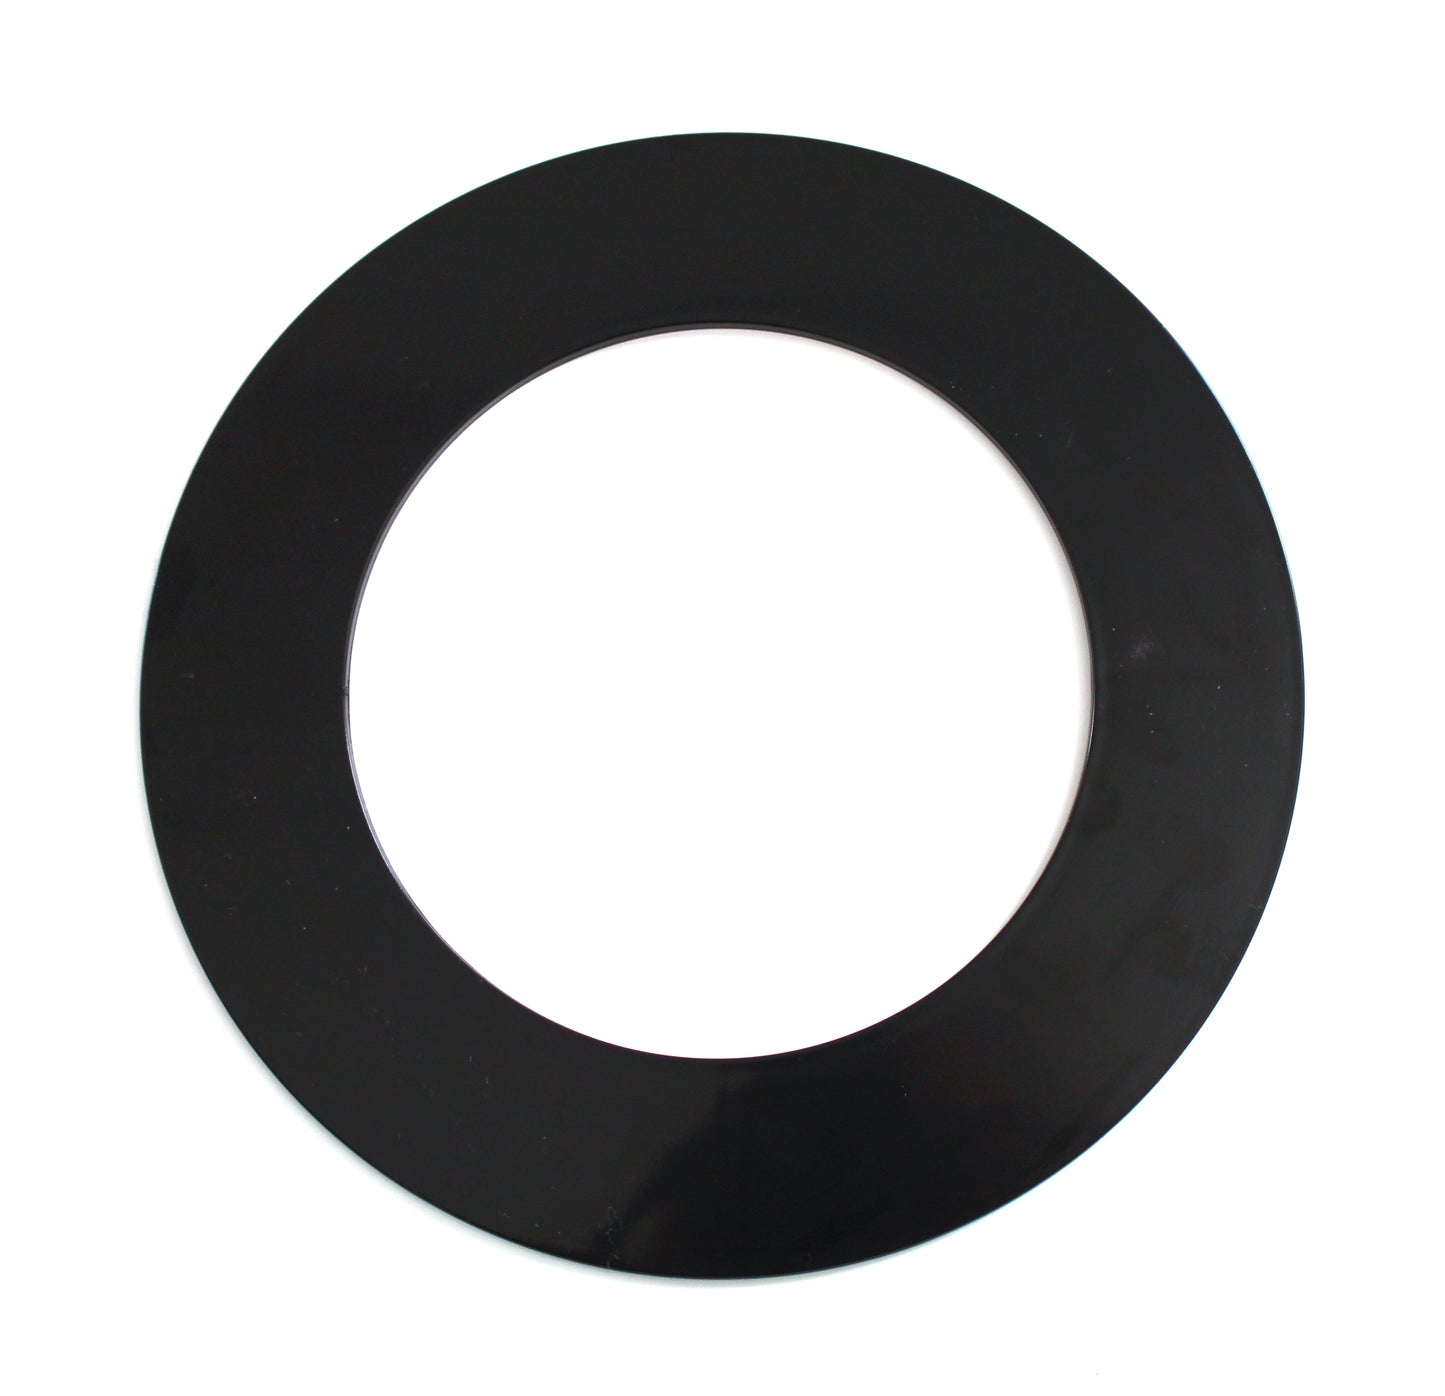 Trim Rings Plastic Ring 8" Inch Recessed Light Ring For Can Lights Lightening Fixture Black or White